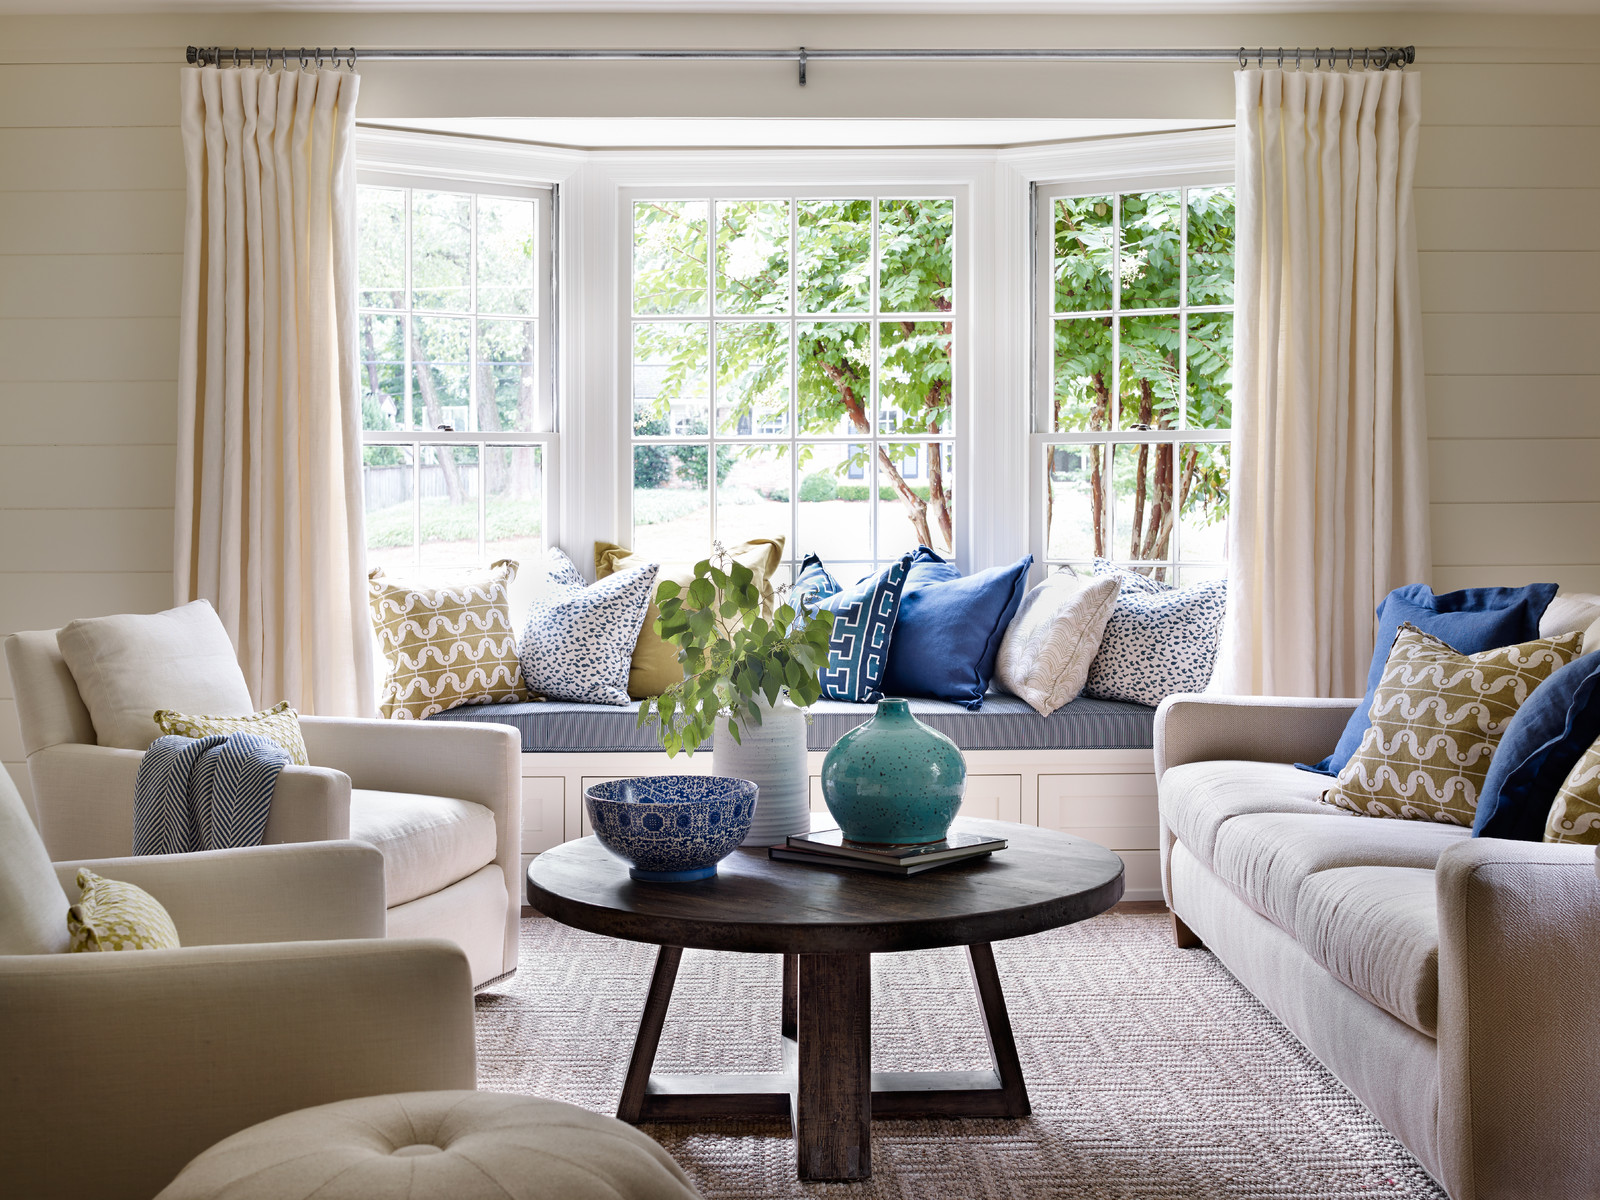 13+ Interesting Living Room with Bay Window Designs to Make the Most of  Your Outdoor Views – KellyHogan